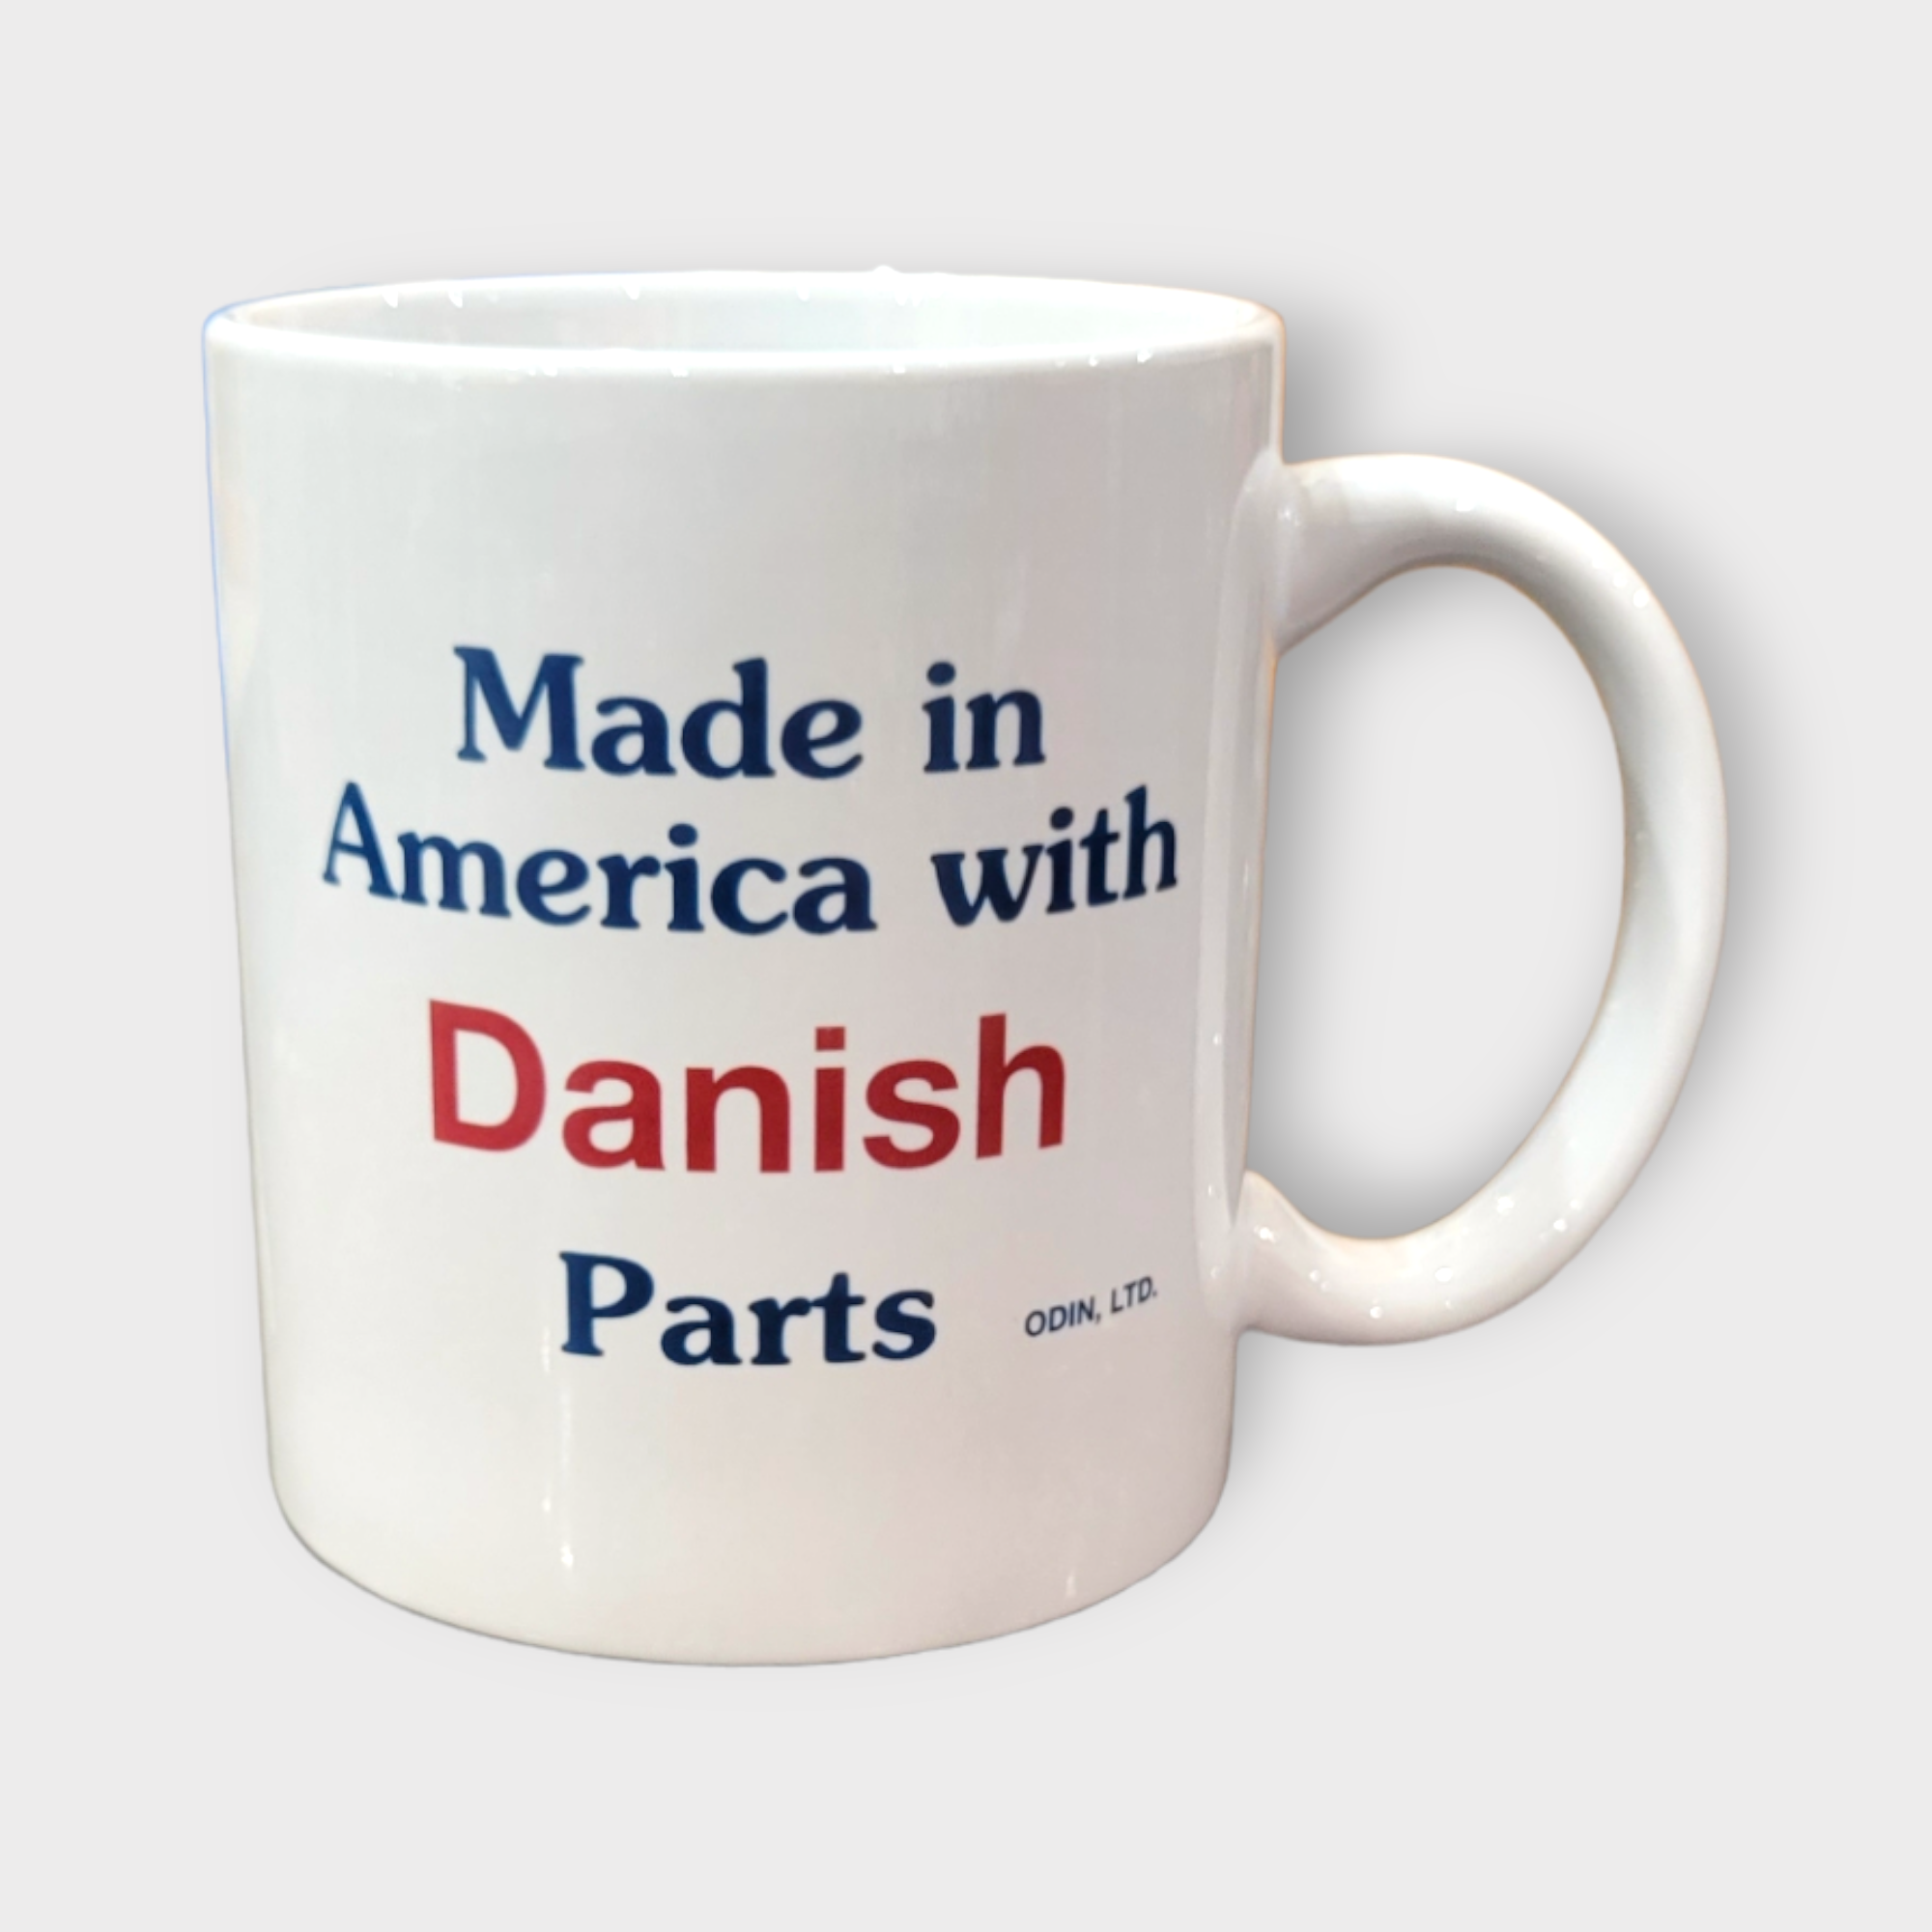 Mug: "Made in America with Danish Parts" (11oz)